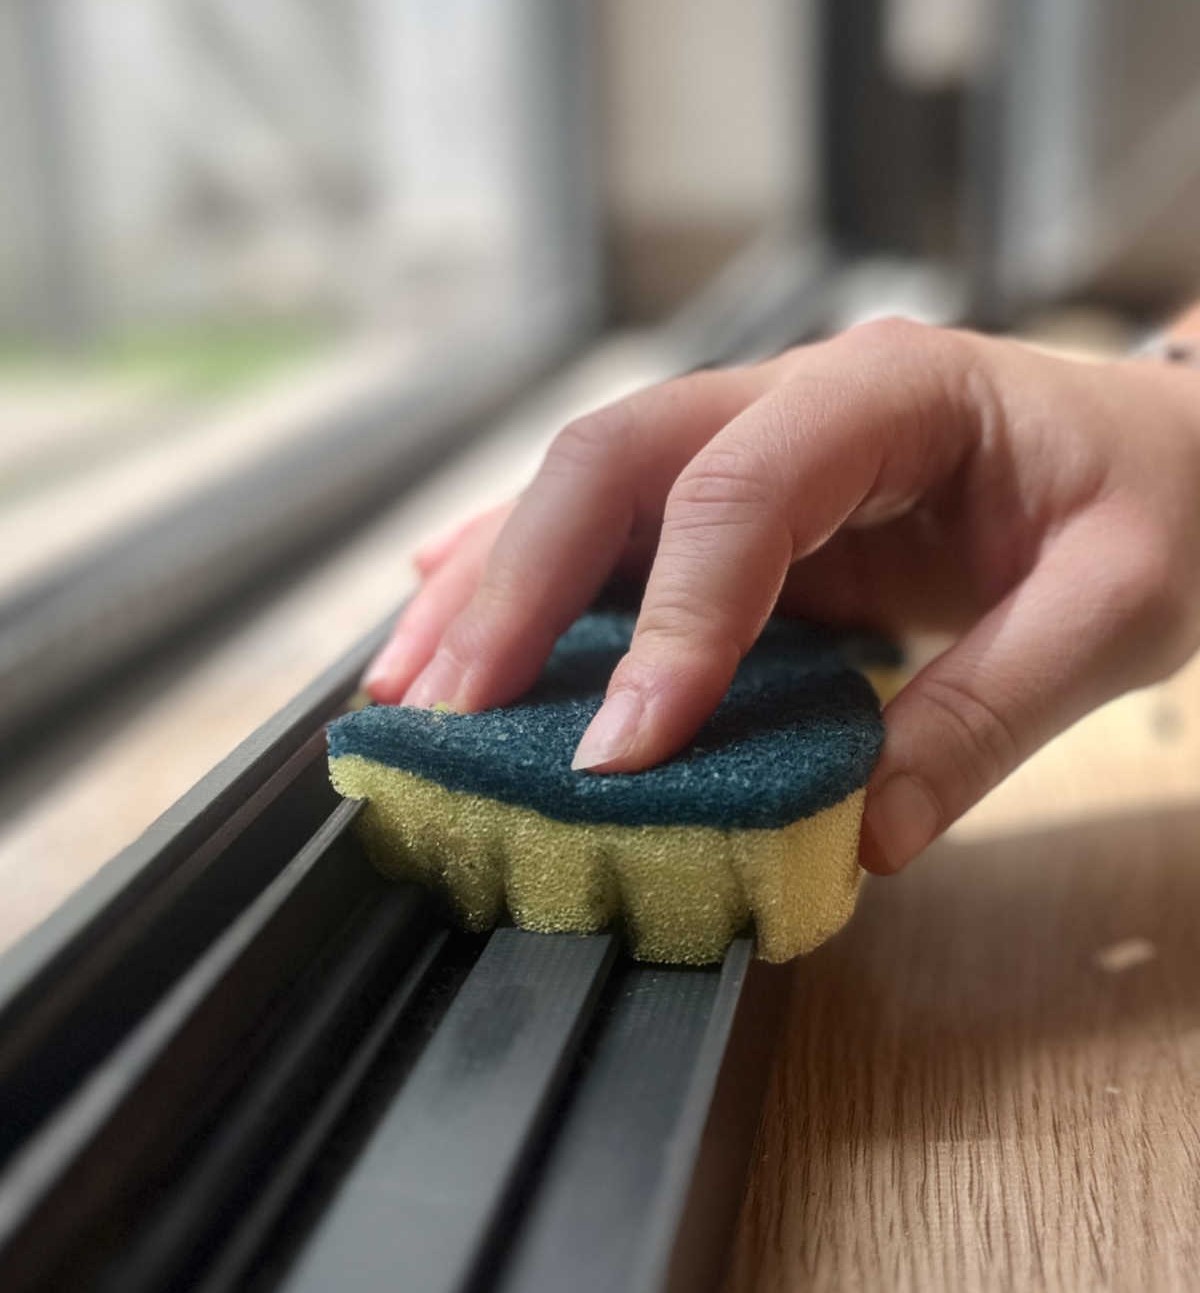 Cut a Sponge to Easier Clean the Window Guides